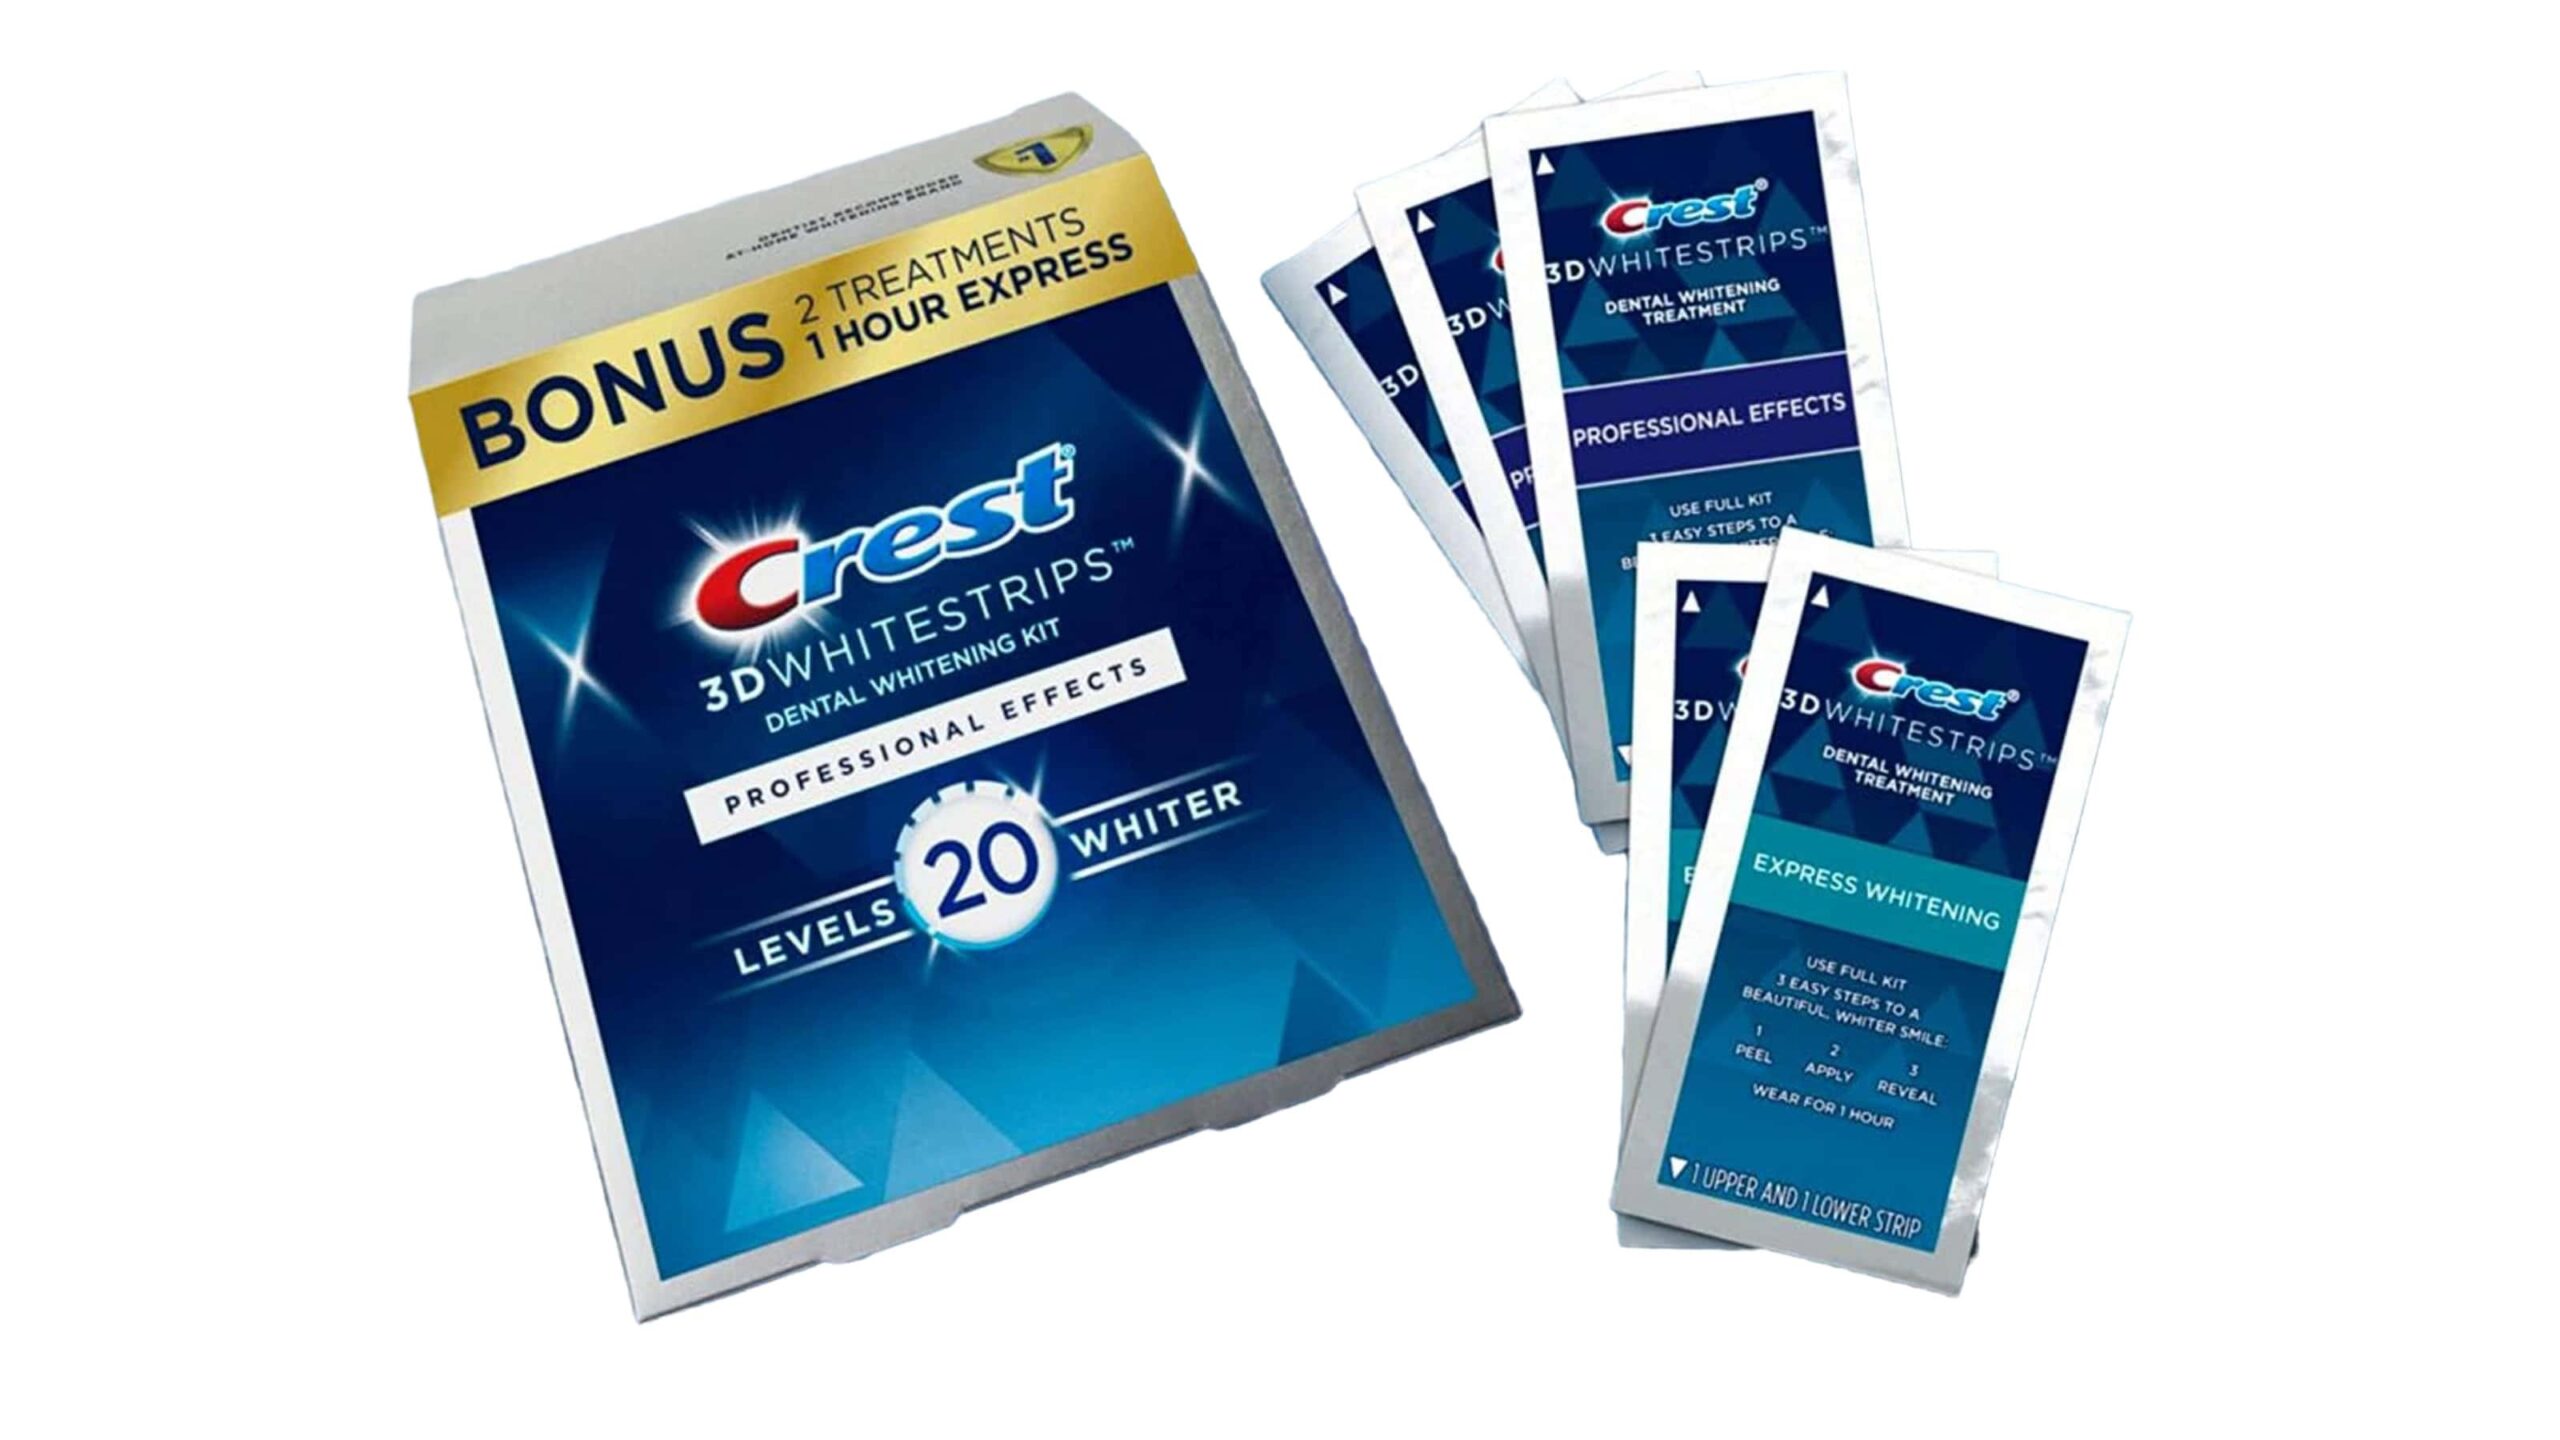 A packet of Crest 3D Whitestrips Professional Effects teeth whitening strip kit, which includes 44 strips (22 count pack)